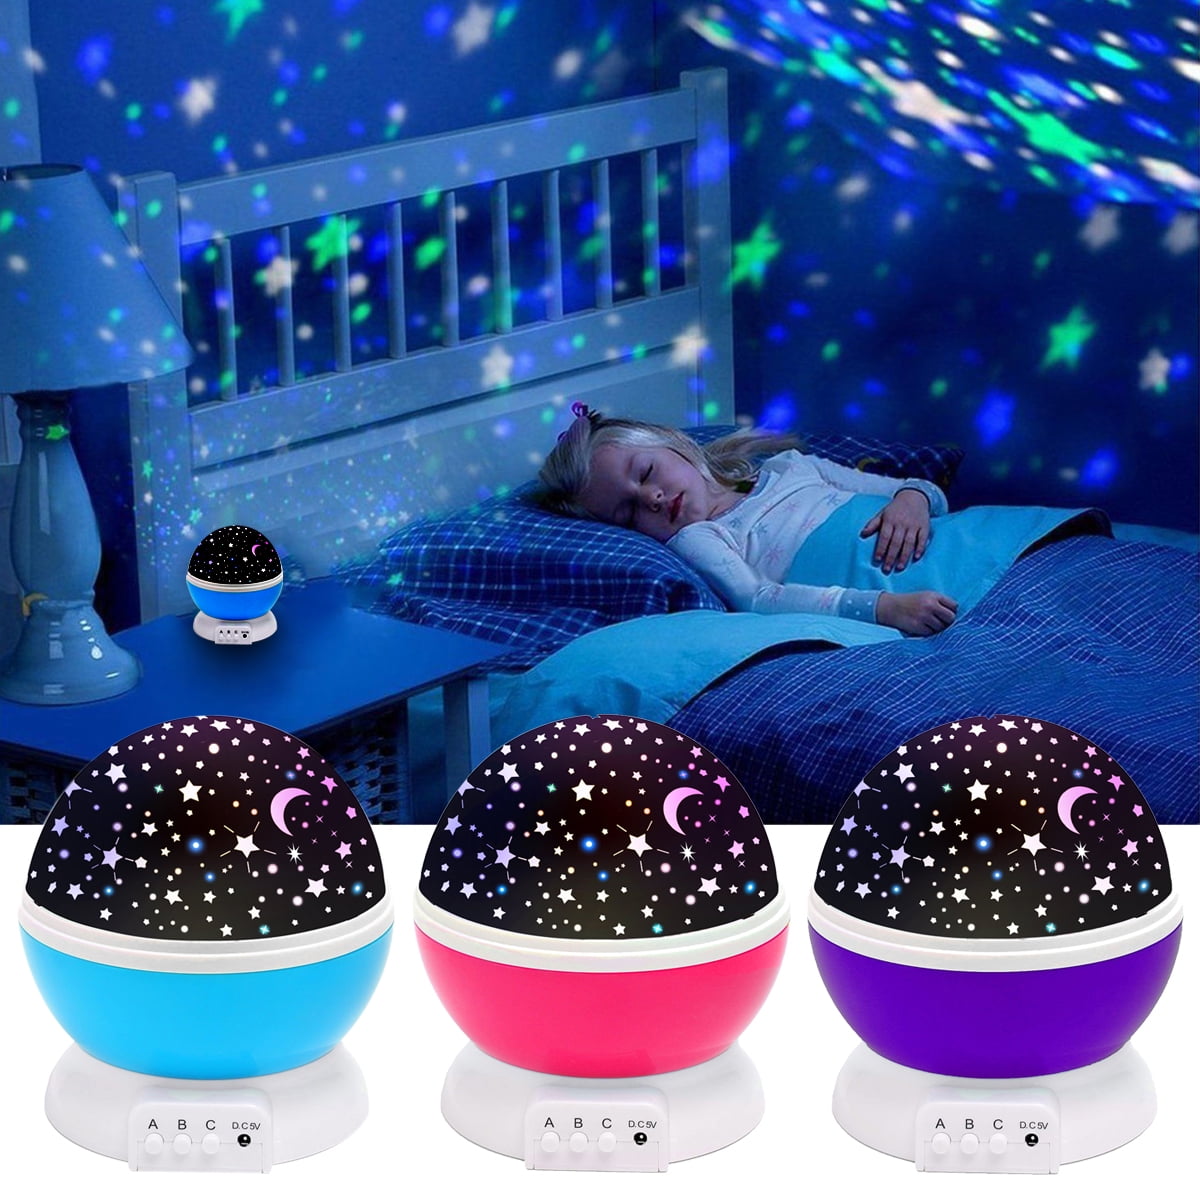 Rotating USB LED Starry Night Light Star Horse Projector Christmas Lamp Gift 